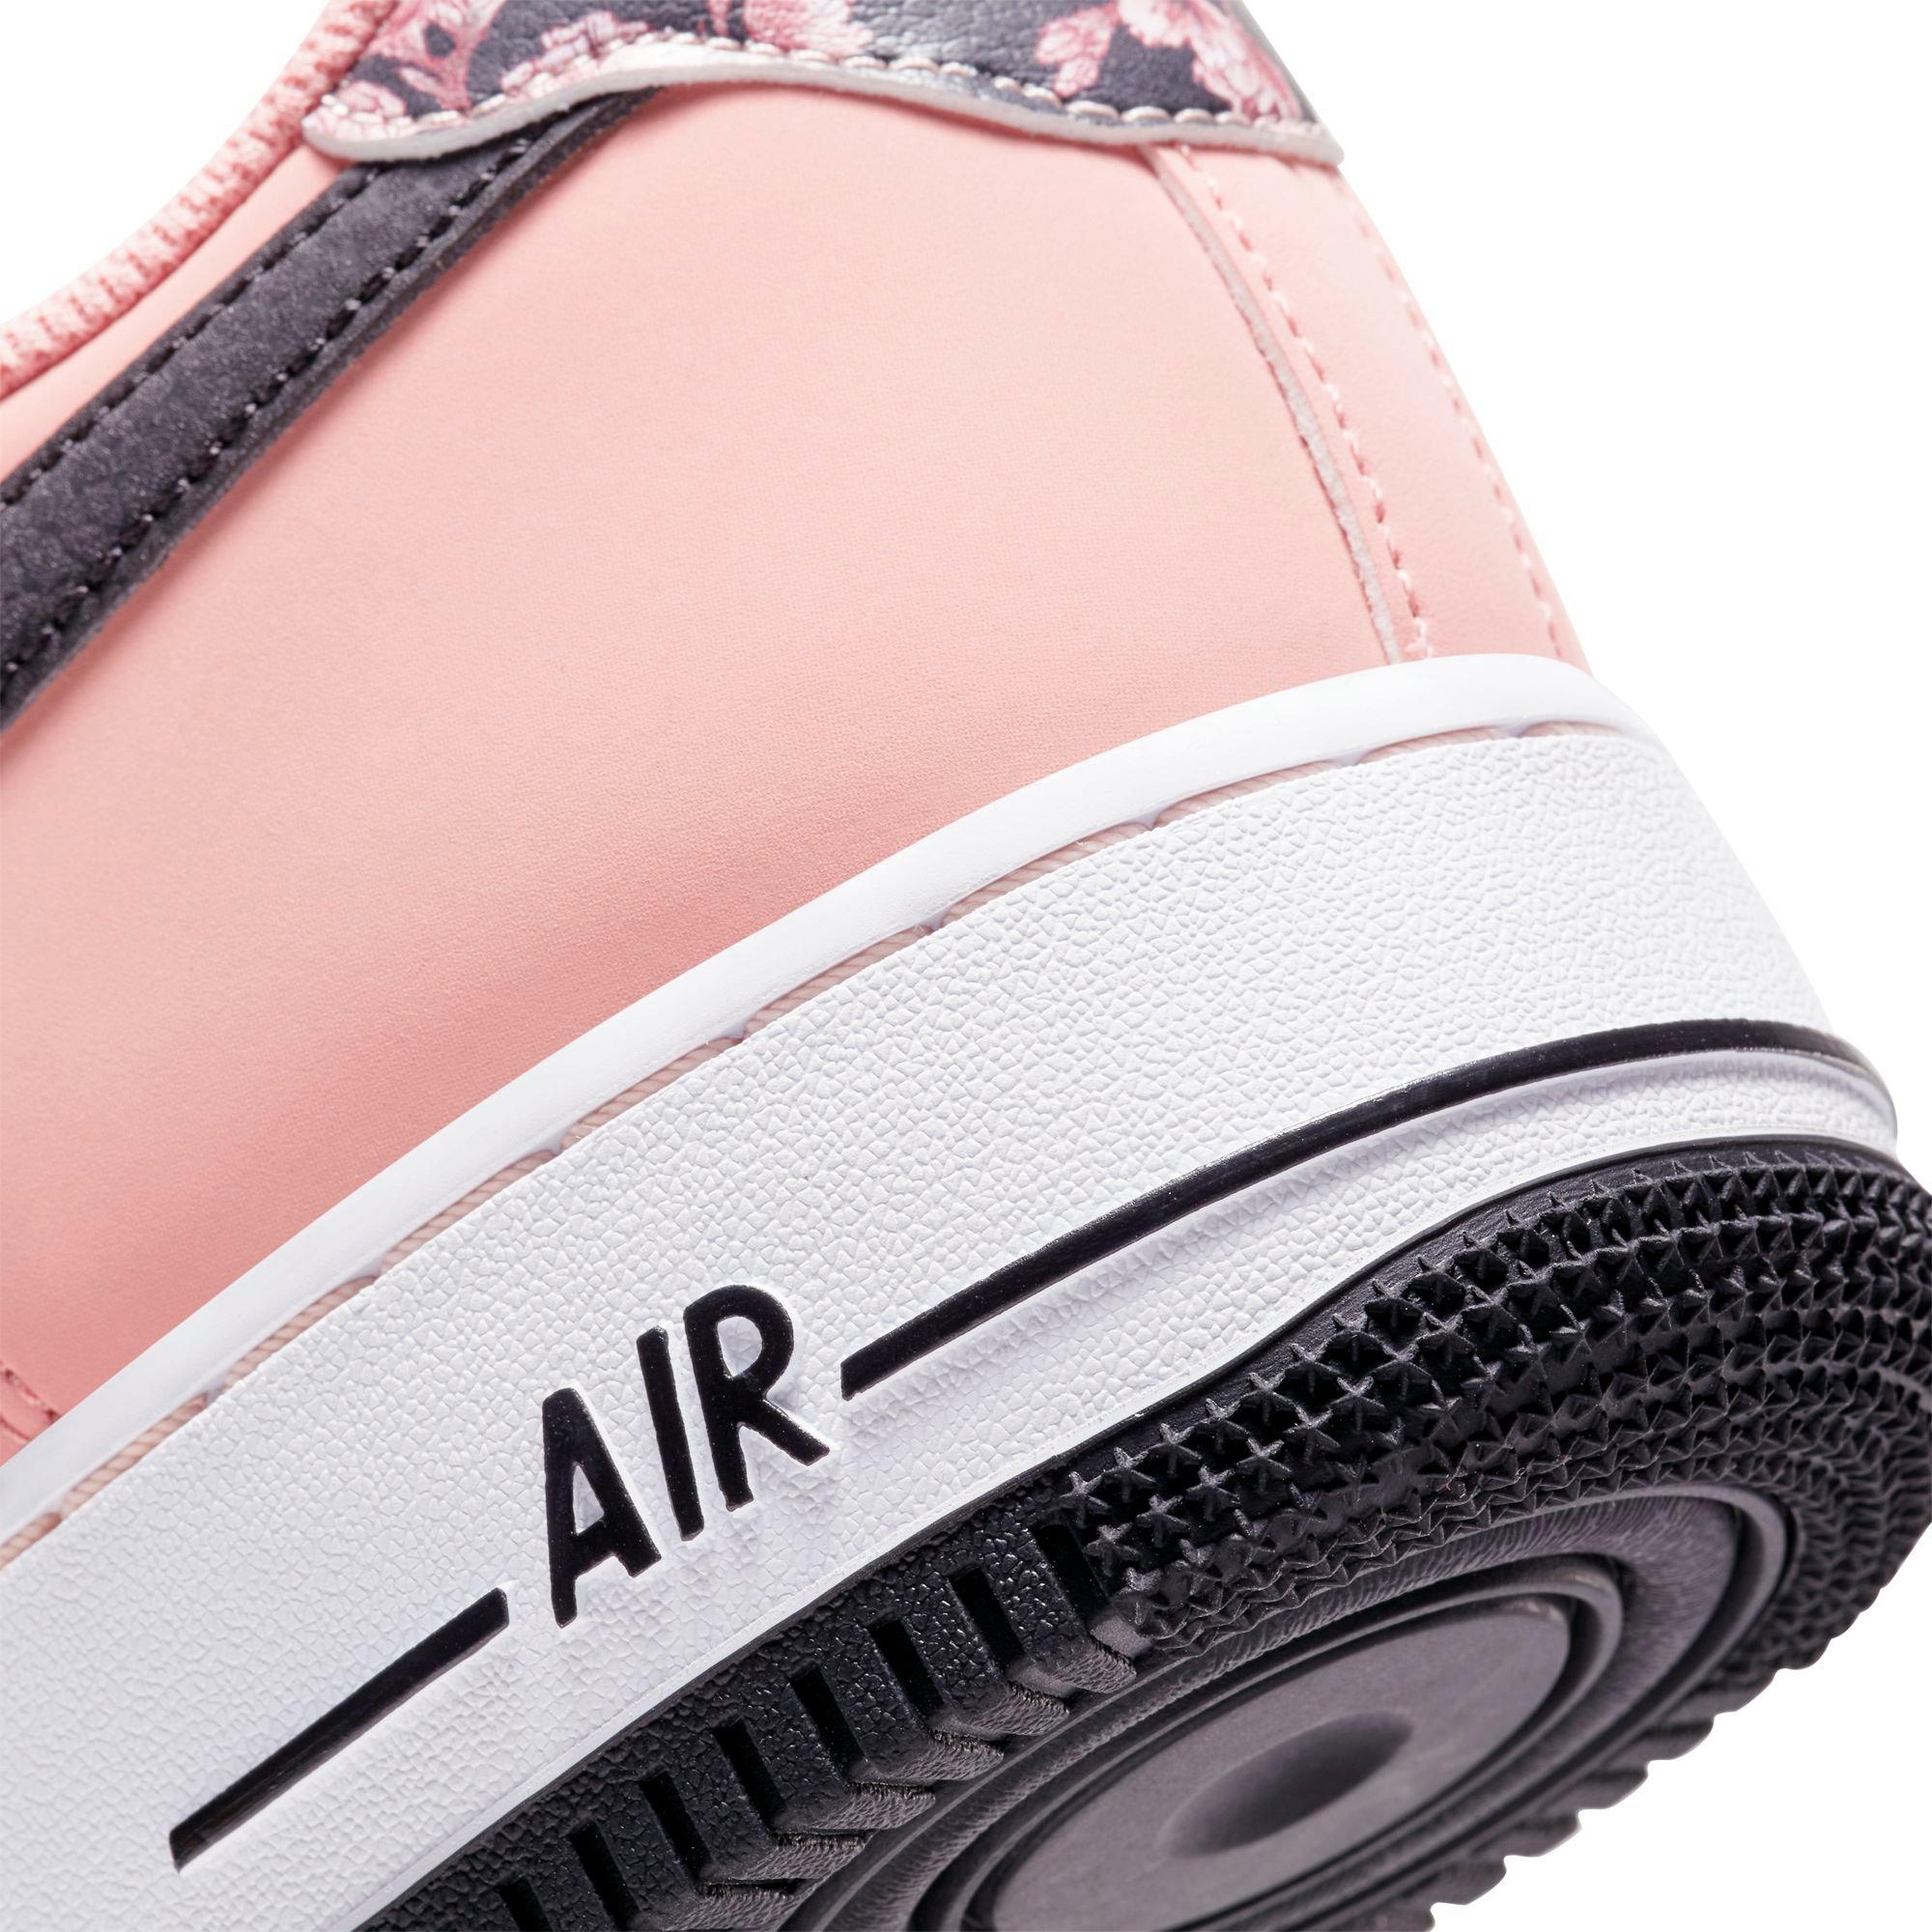 air force 1 07 limited edition pink